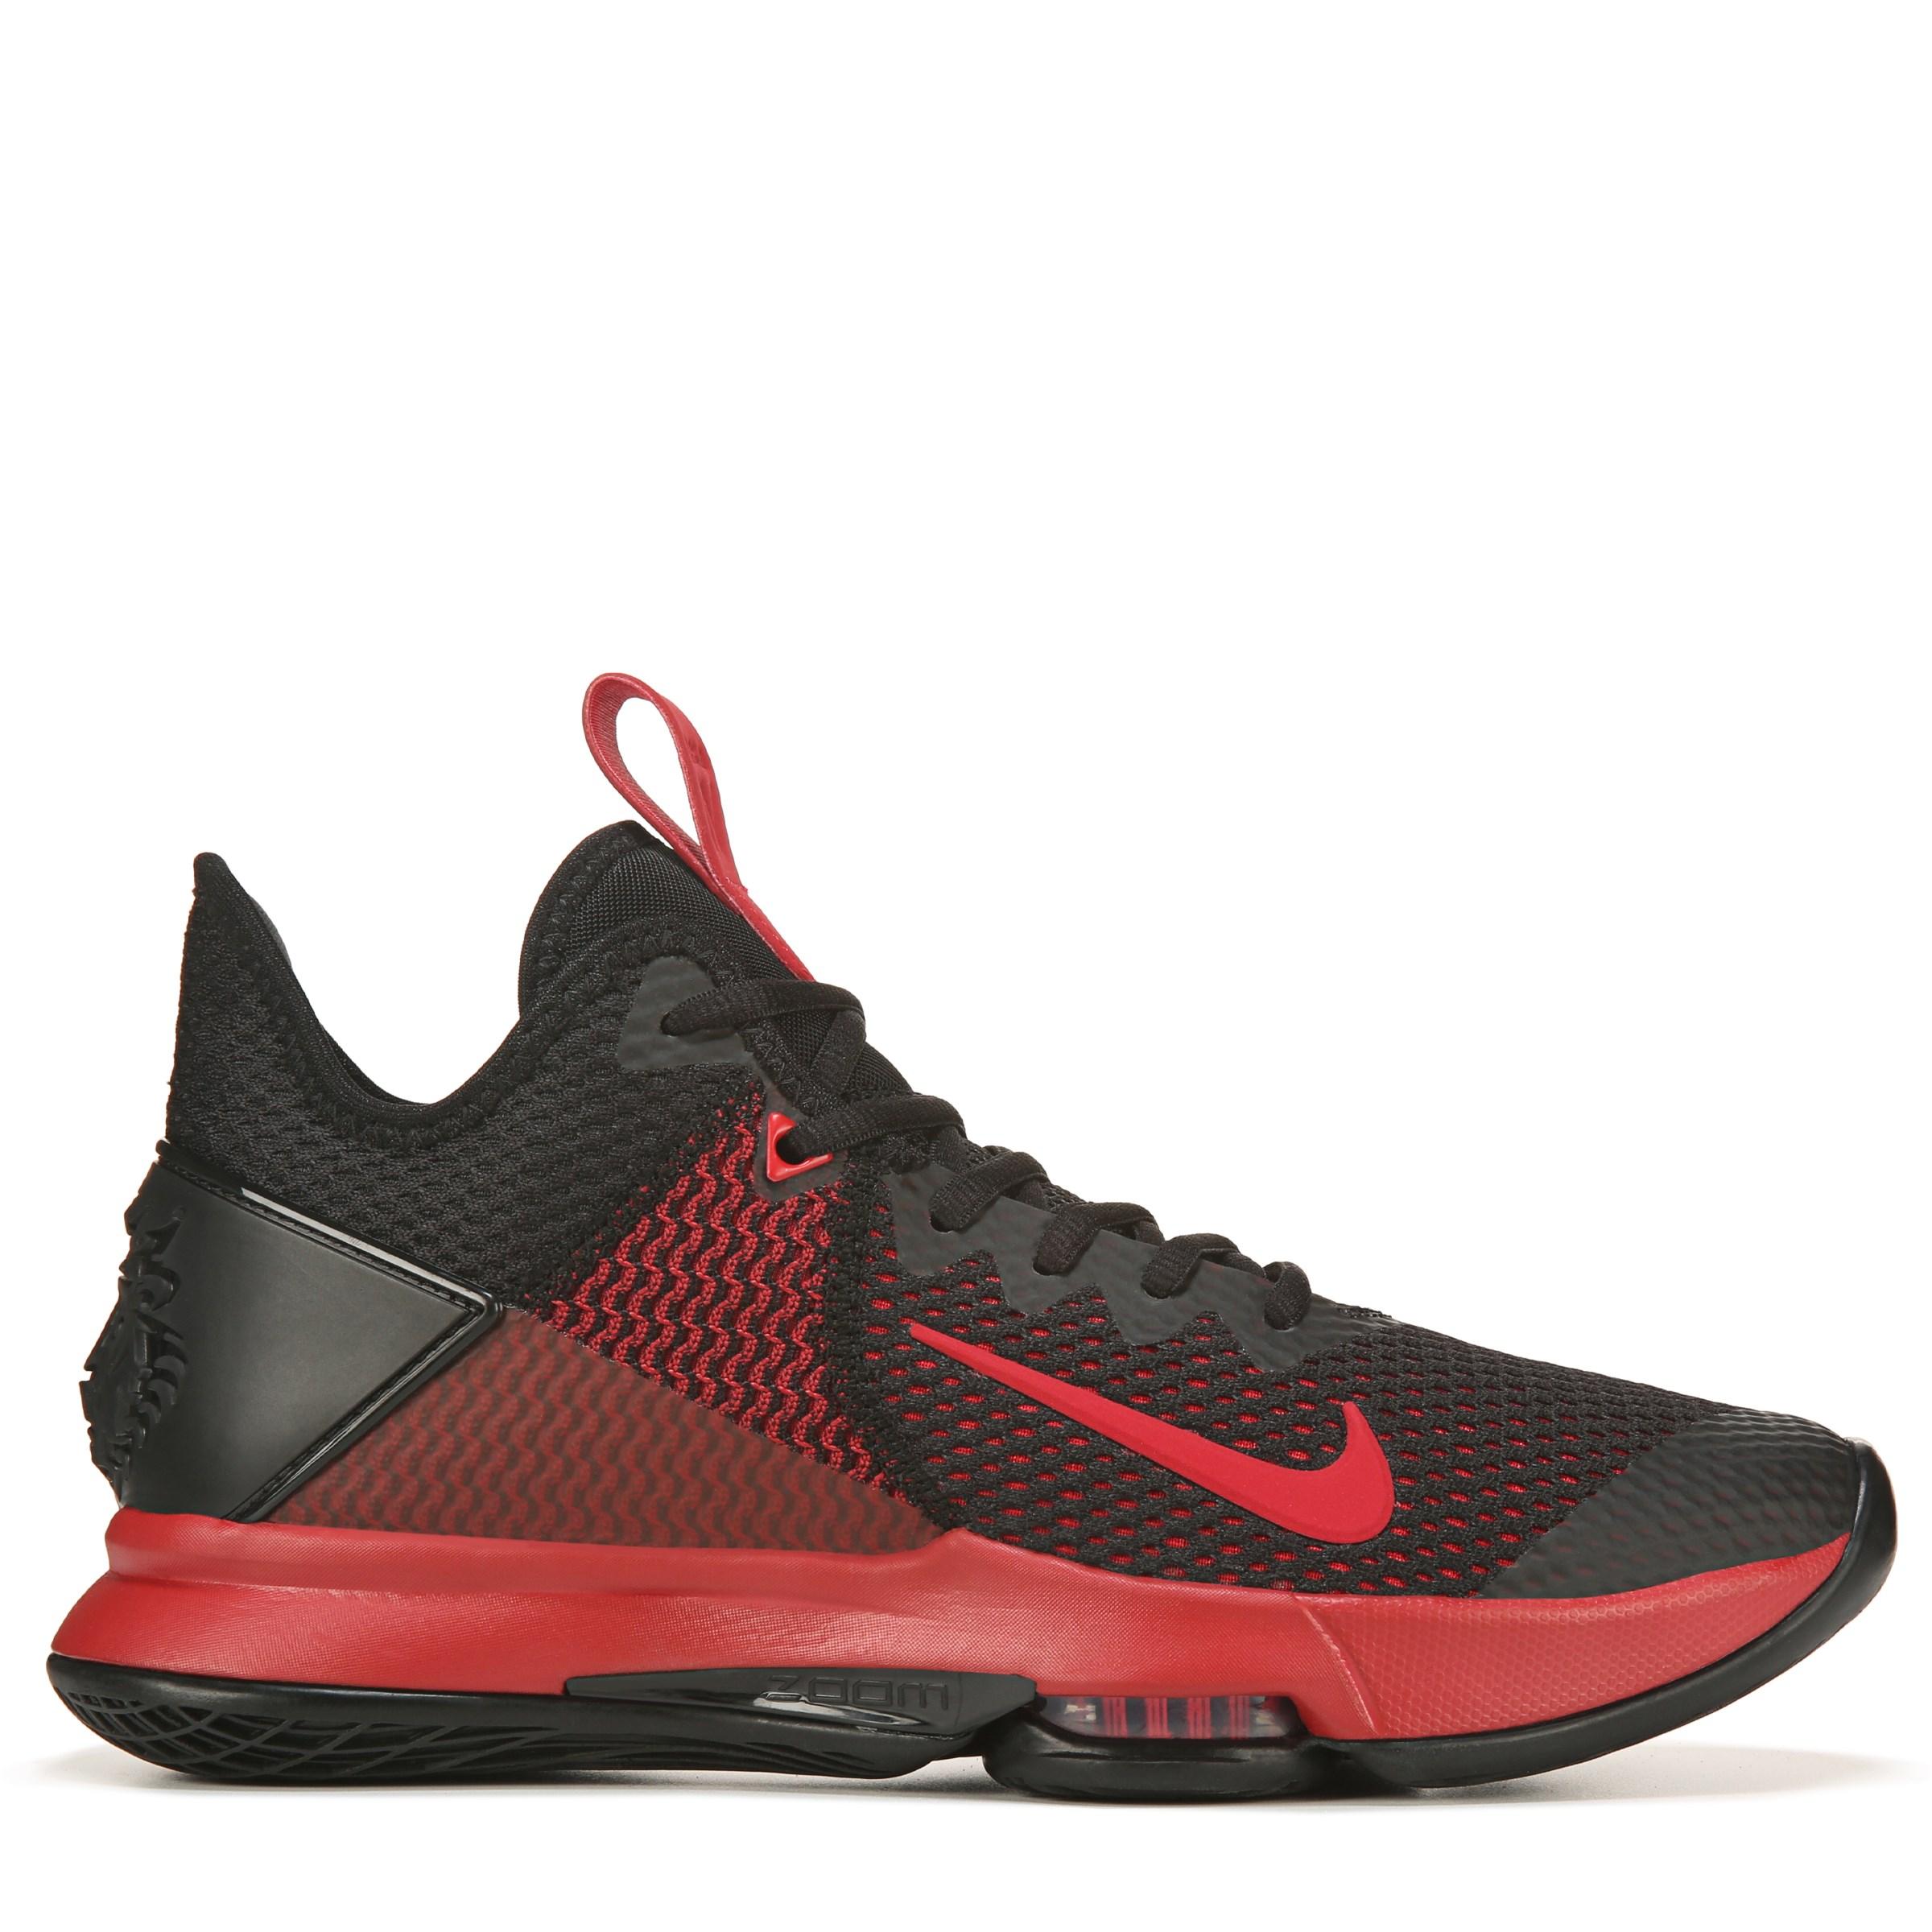 Nike Synthetic Lebron Witness Iv Basketball Shoes in Black/Red (Red ...